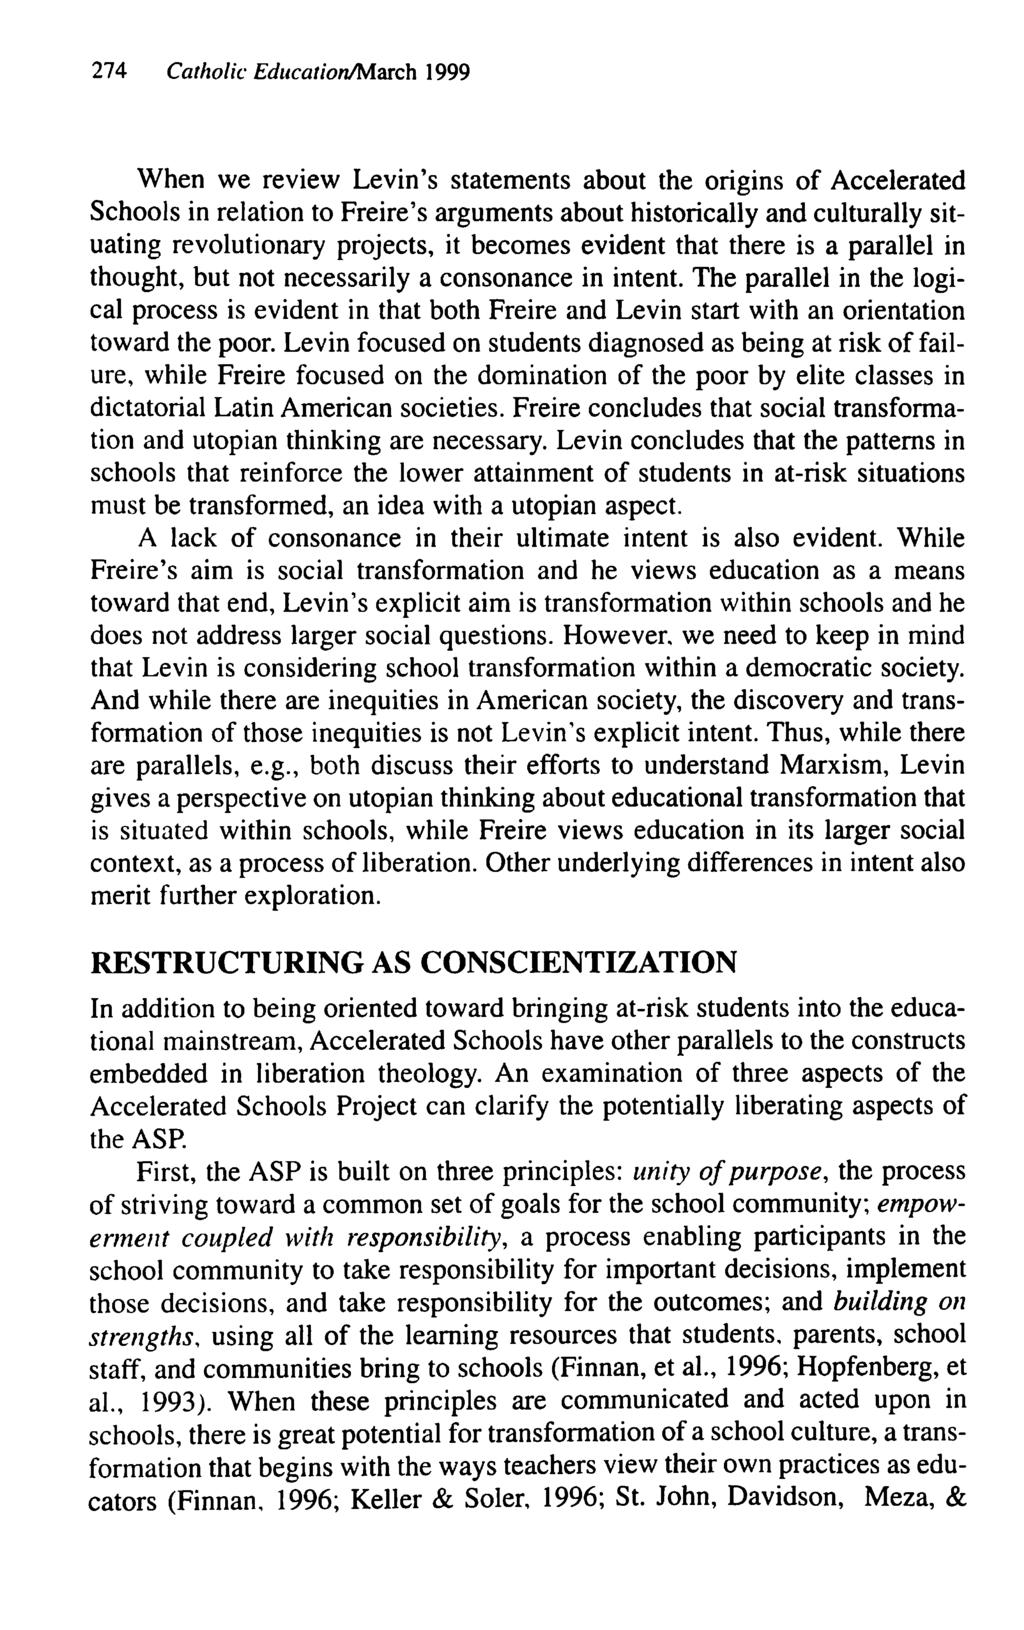 274 Catholic Education/Msrch 1999 When we review Levin's statements about the origins of Accelerated Schools in relation to Freire's arguments about historically and culturally situating